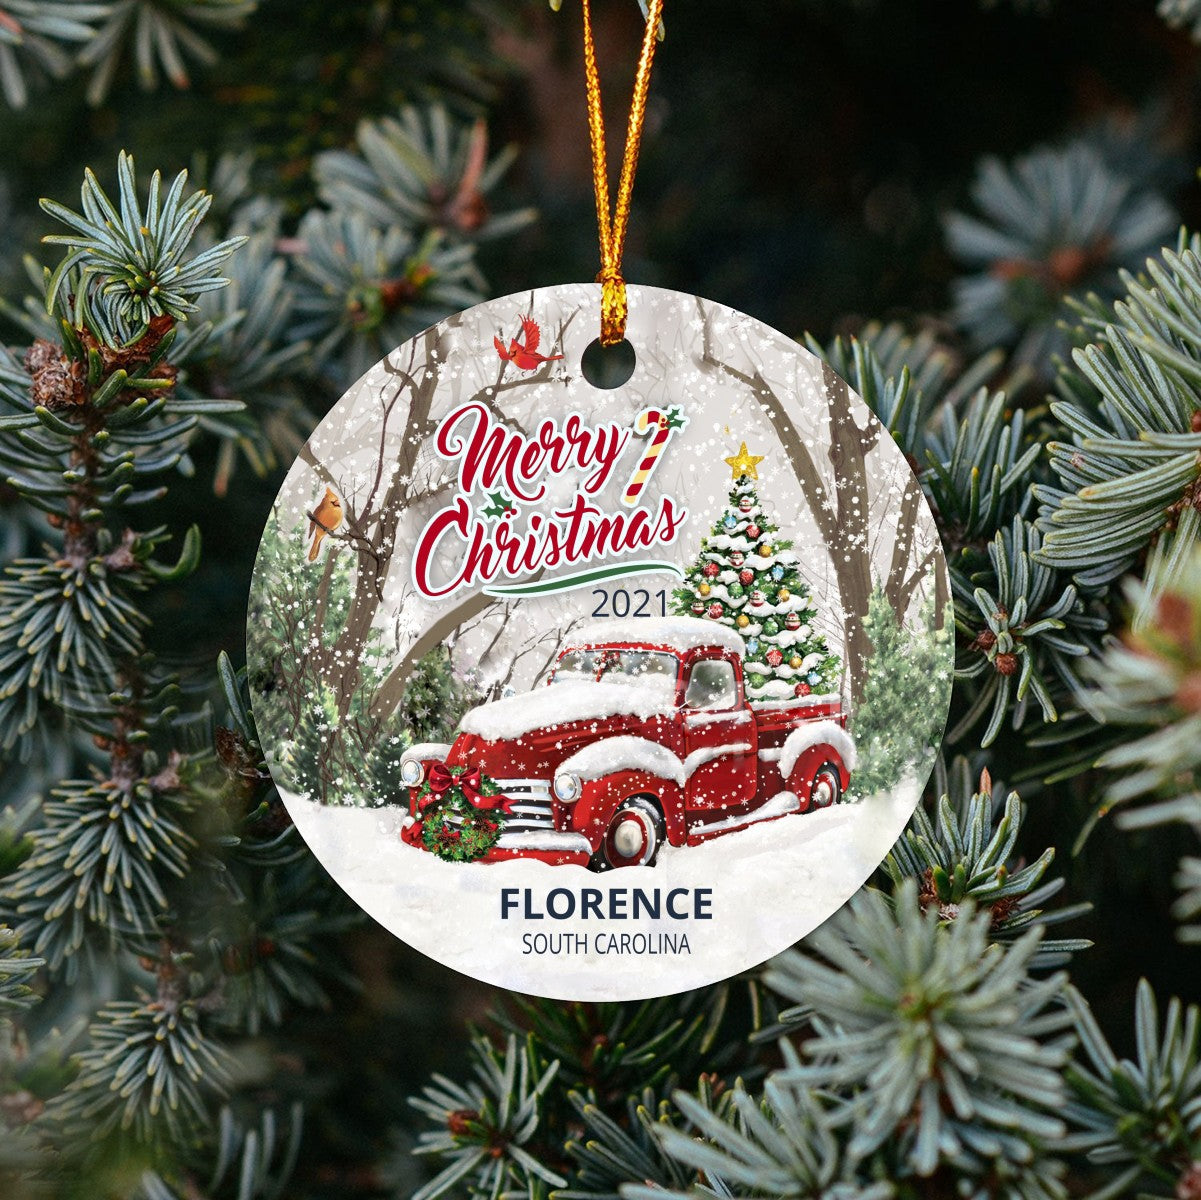 Christmas Tree Ornaments Florence - Ornament Customize With Name City And State Florence South Carolina SC - Red Truck Xmas Ornaments 3'' Plastic Gift For Family, Friend And Housewarming